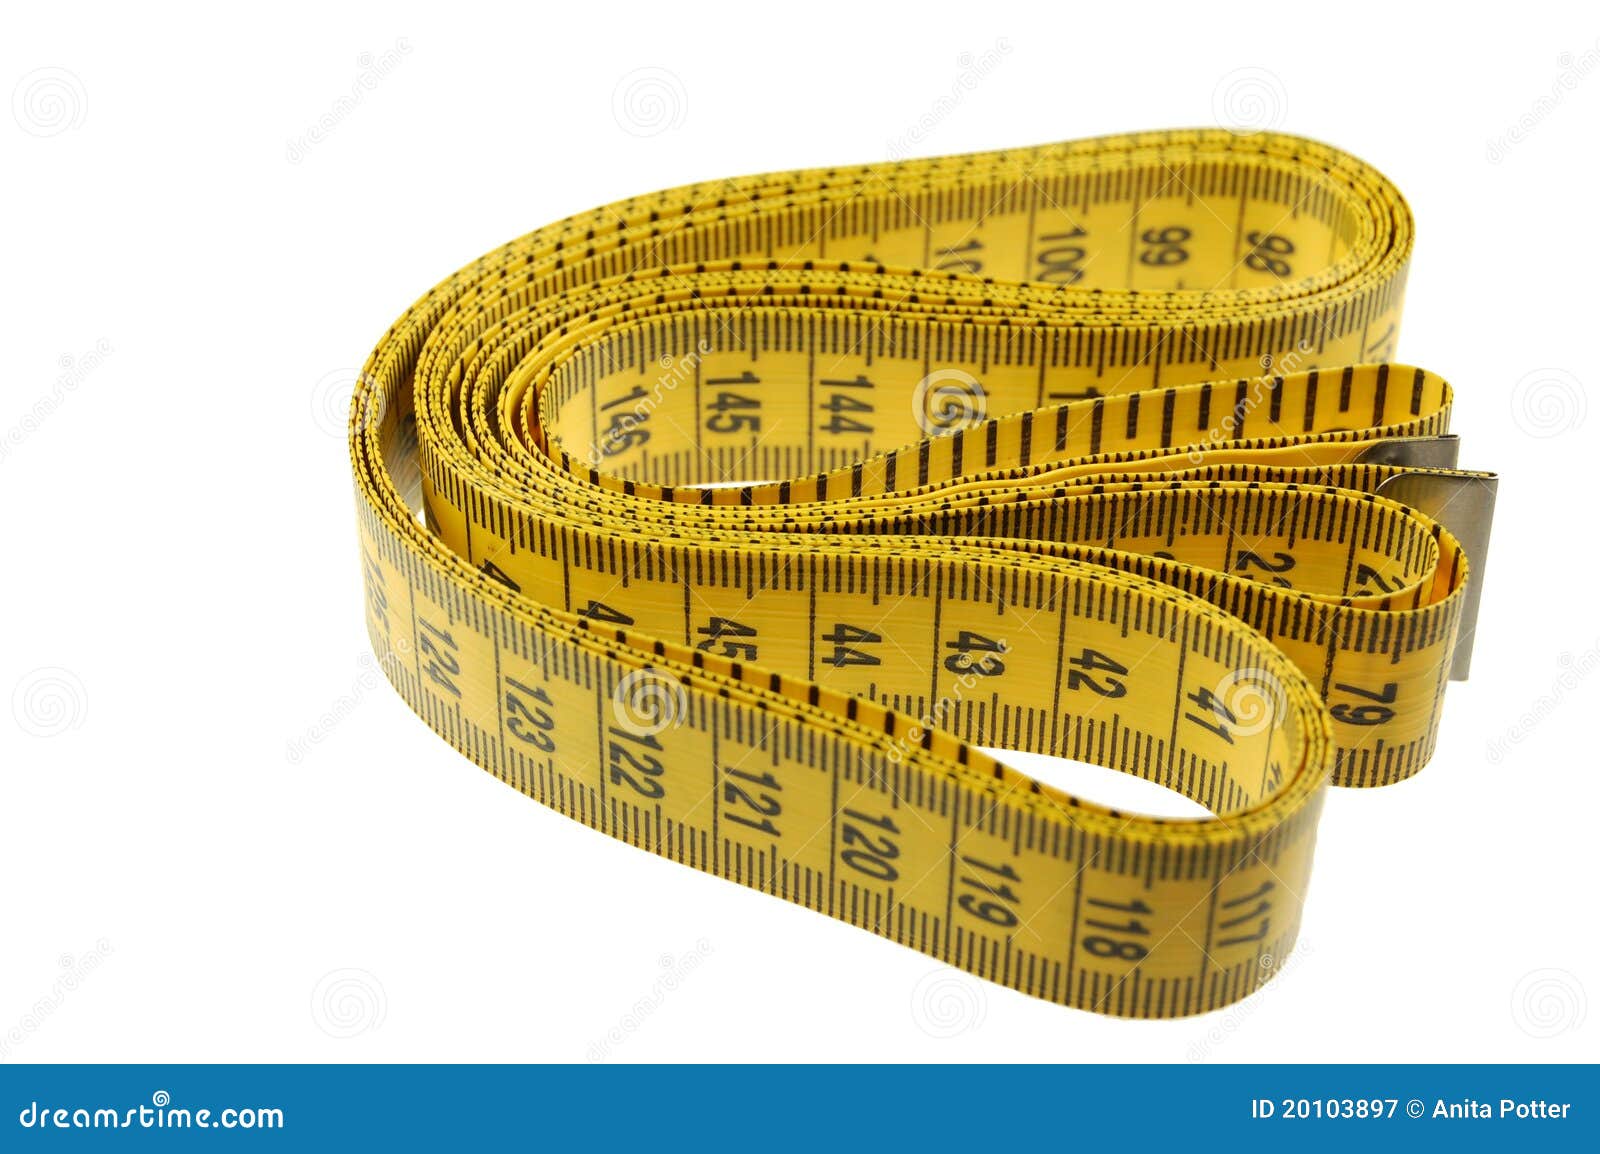 A Seamstress or Tailors Measuring Tape Stock Image - Image of